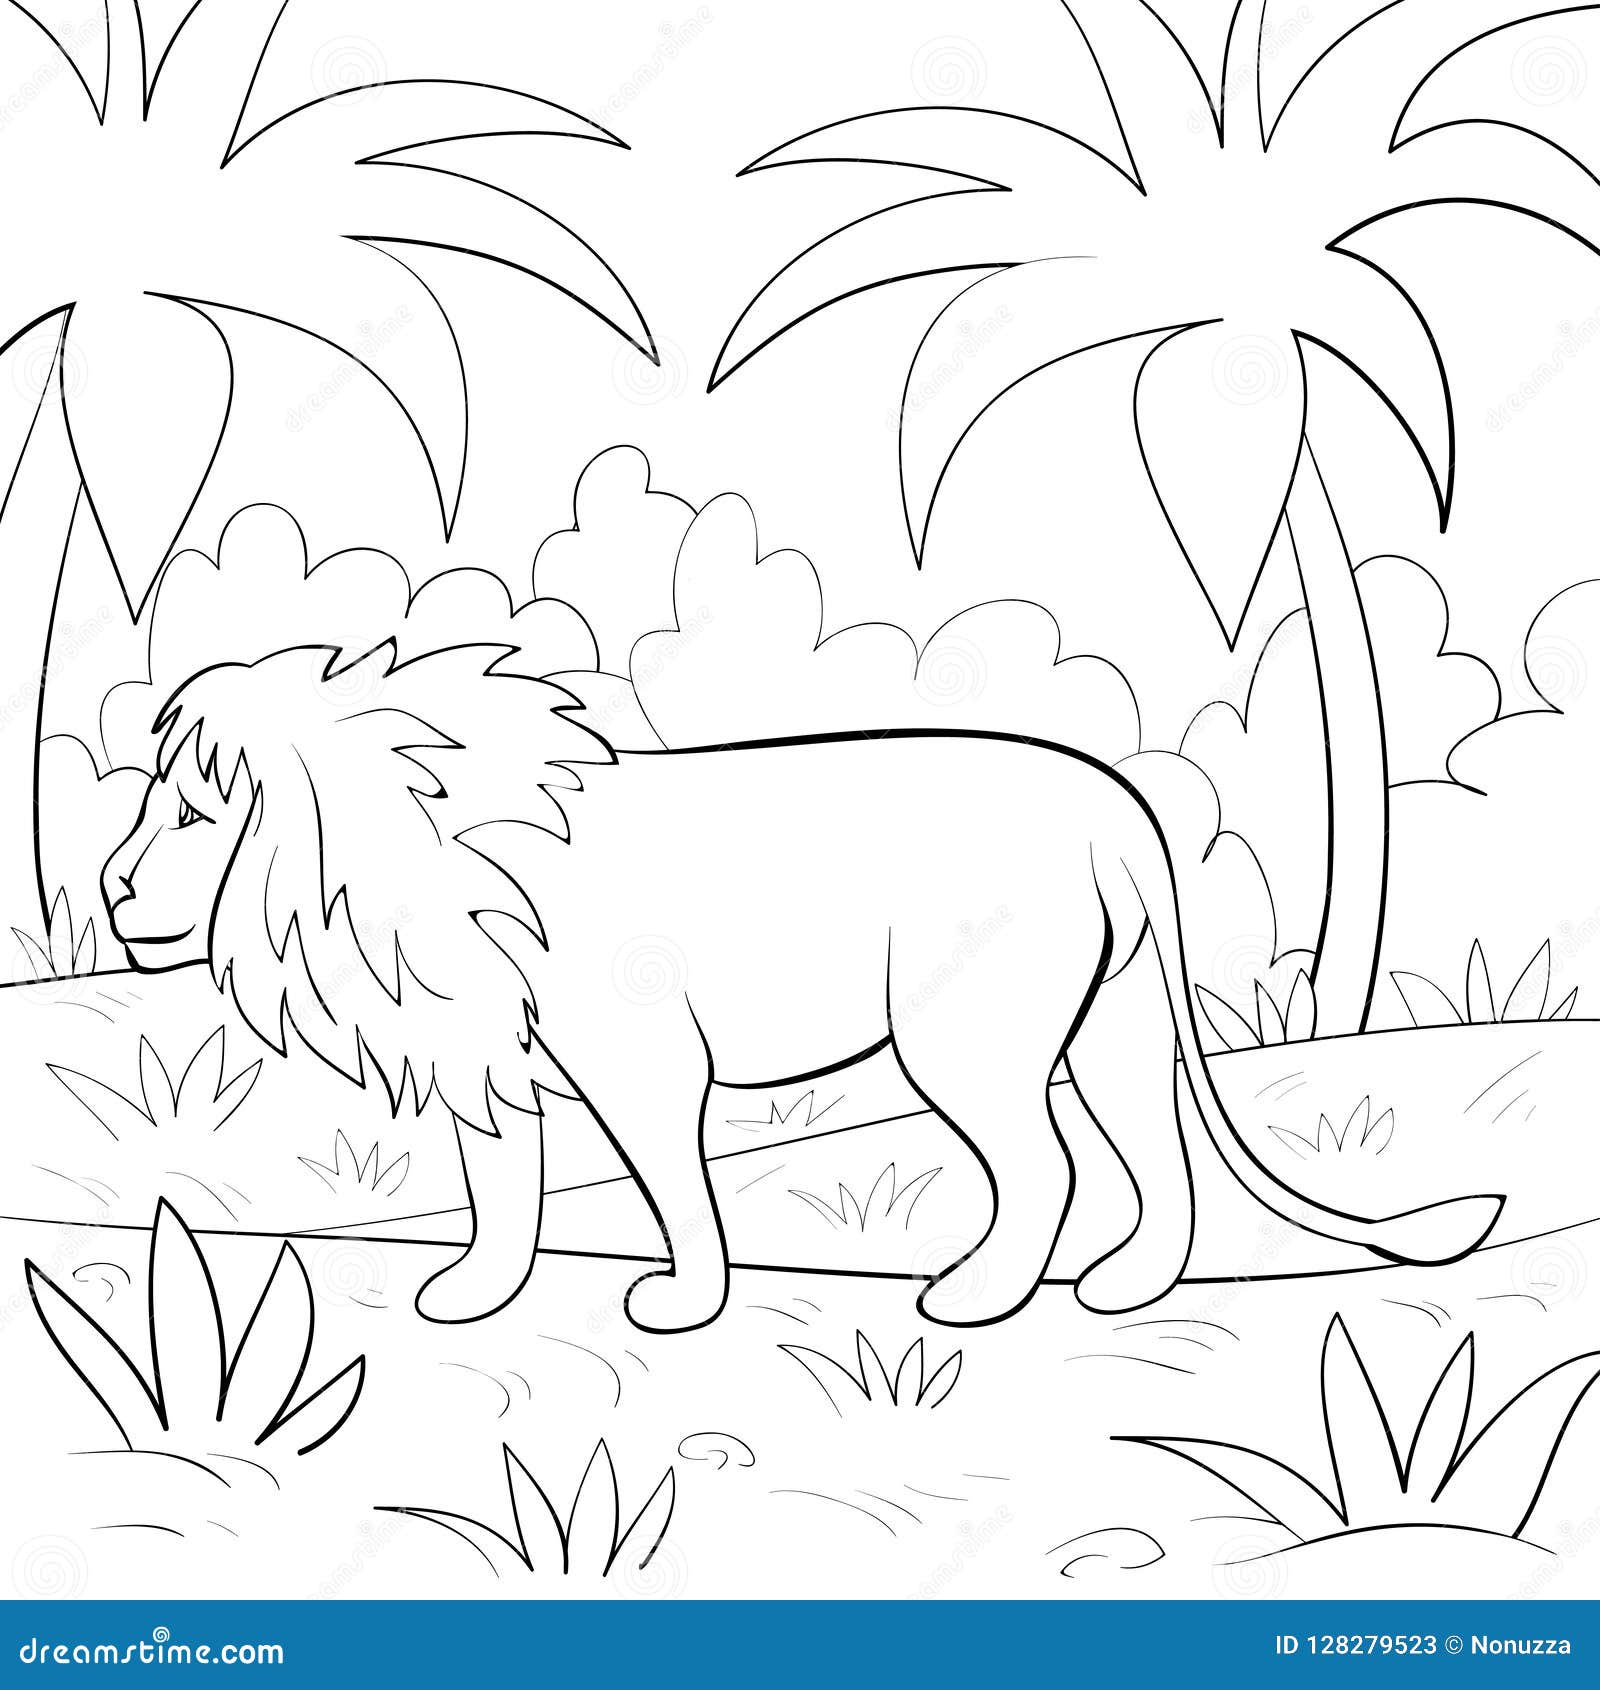 Coloring Page,book a Cute Lion Image for Art Illustration for Relaxing. Stock Vector - of abstract: 128279523